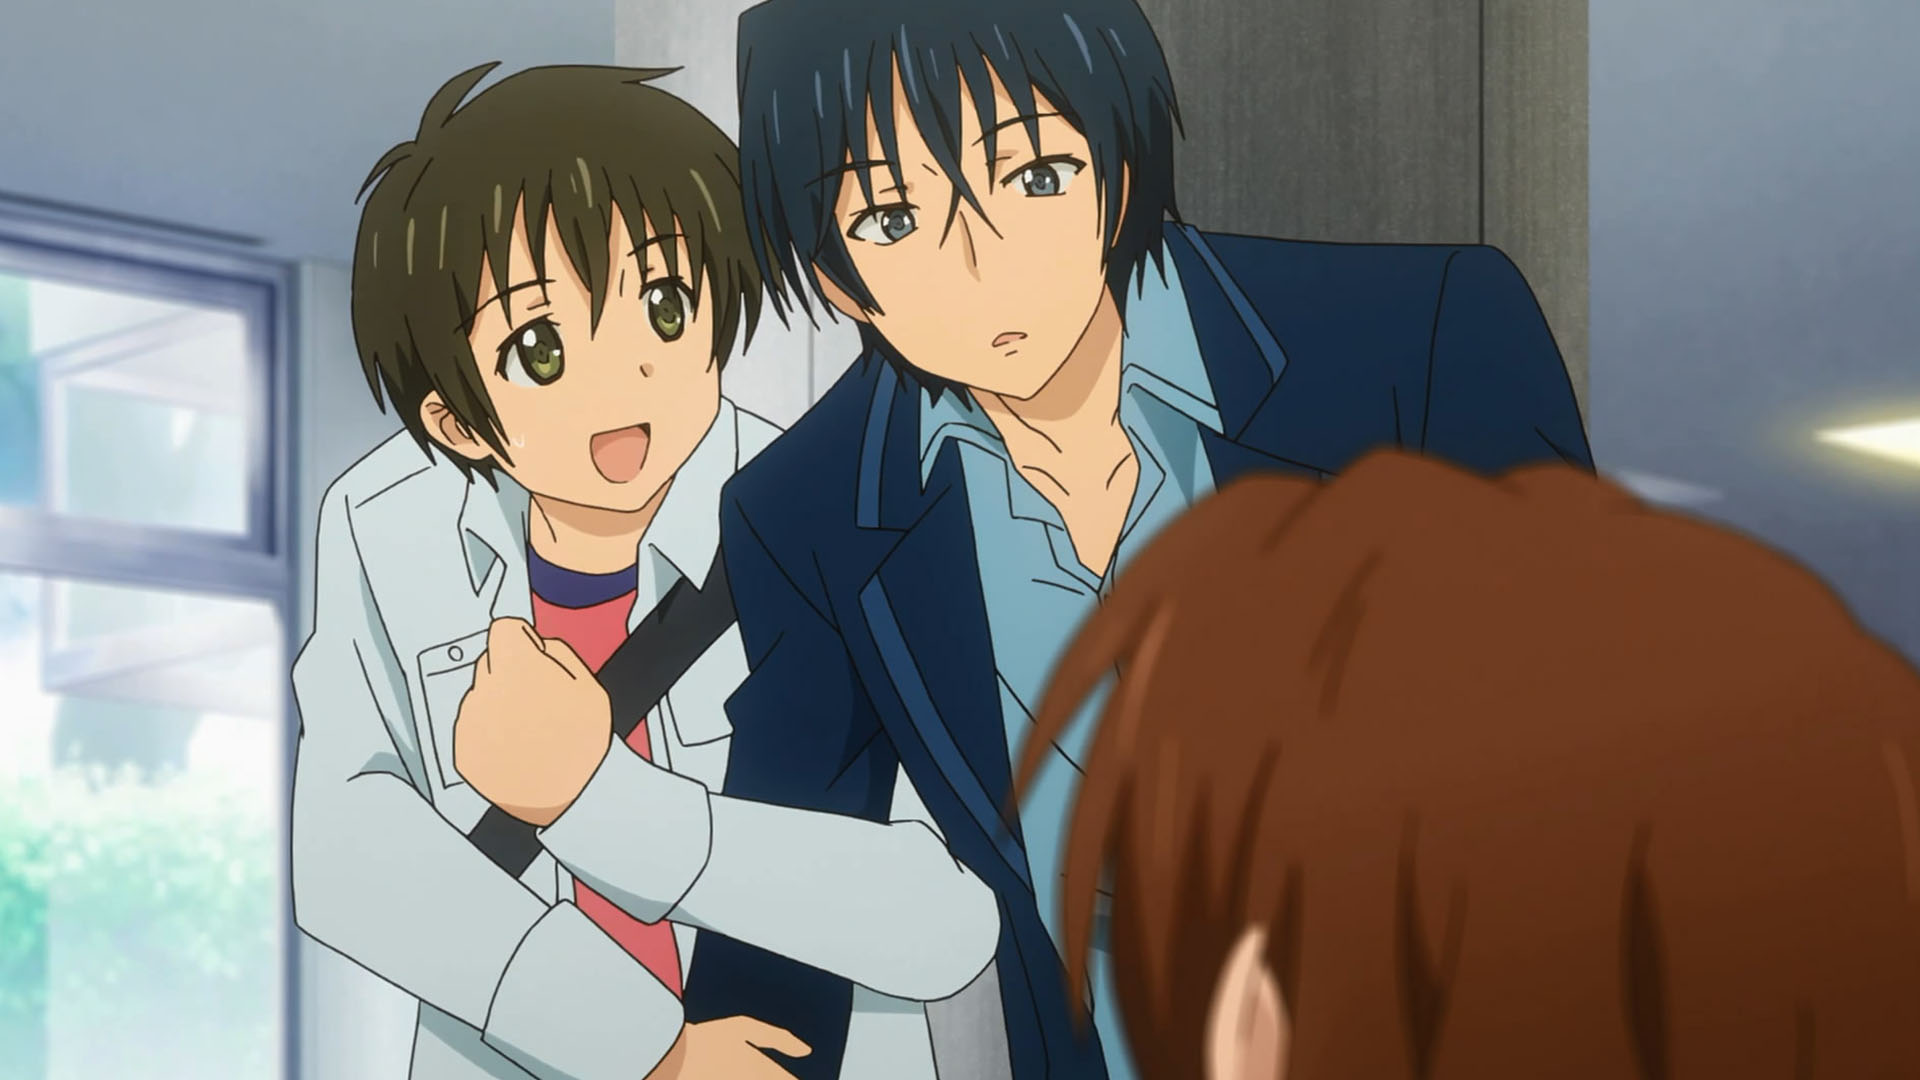 Golden Time Episode 23 Anime Review - Tragic Ending Theory 